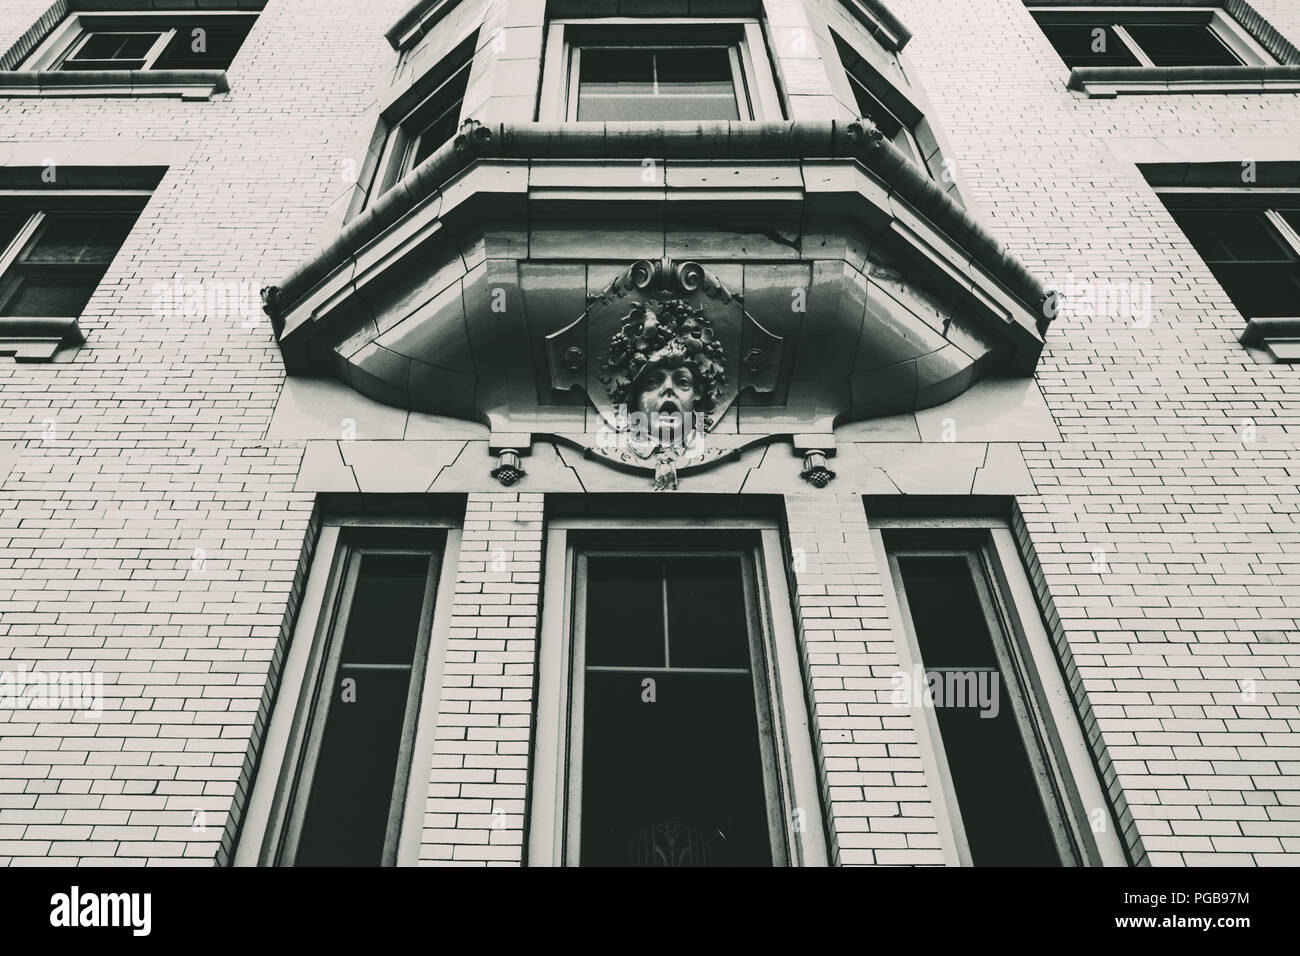 Monochrome perspective view of the windows of an old downtown building. Stock Photo